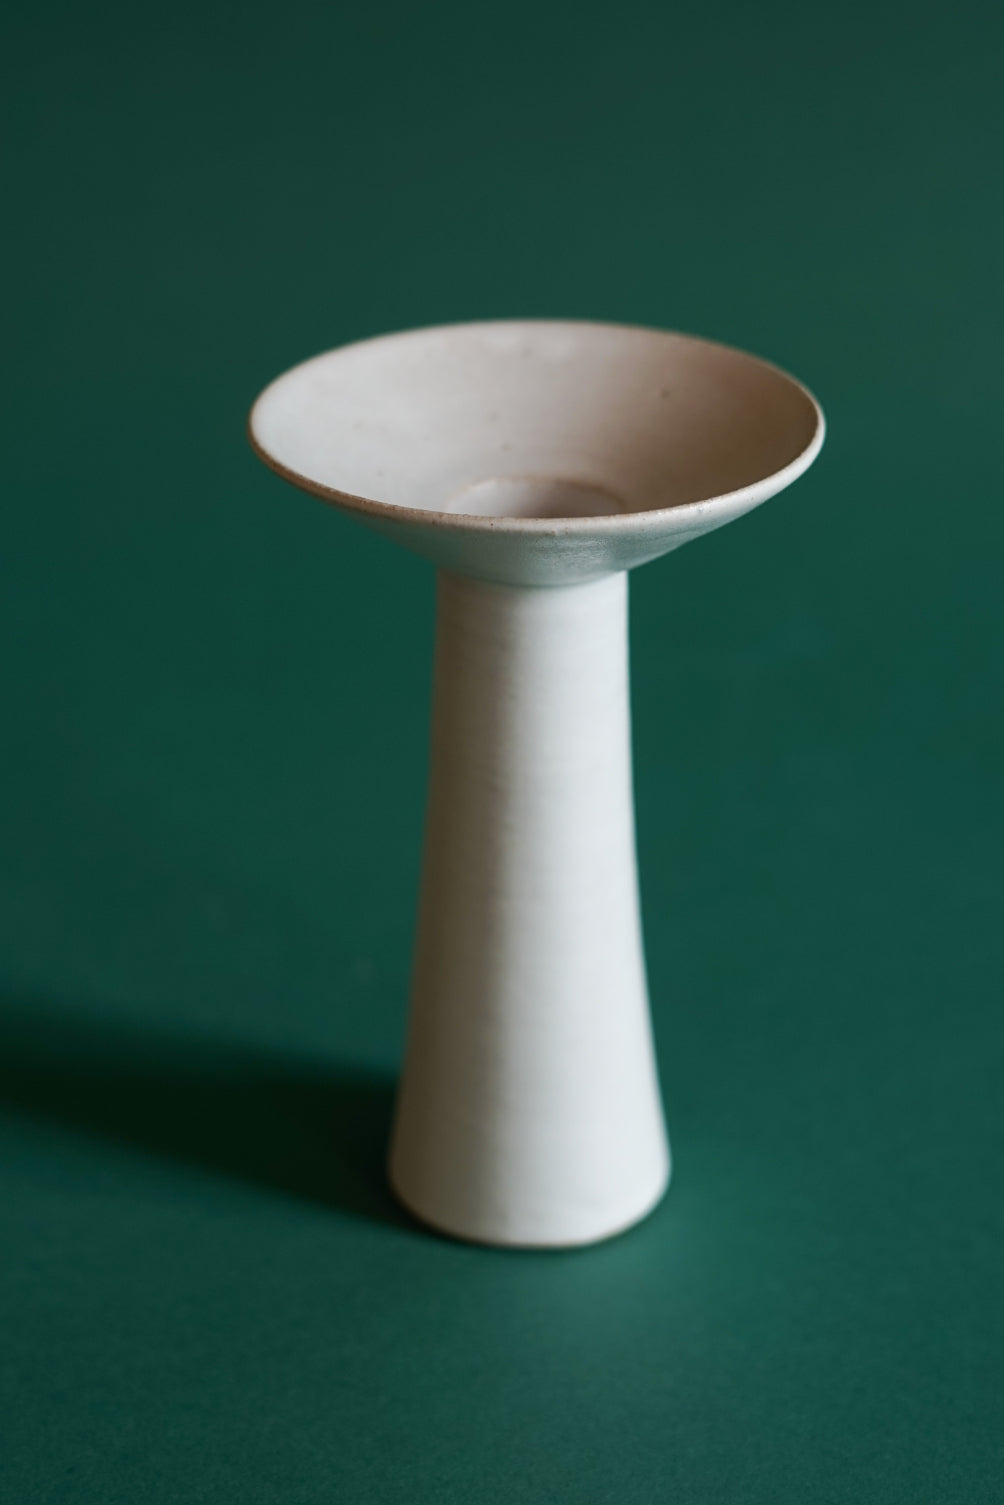 Cara Guthrie has created a collection of Midsummer Candlesticks for Bard. Pictured here in a white chalk glaze in the largest of three sizes.